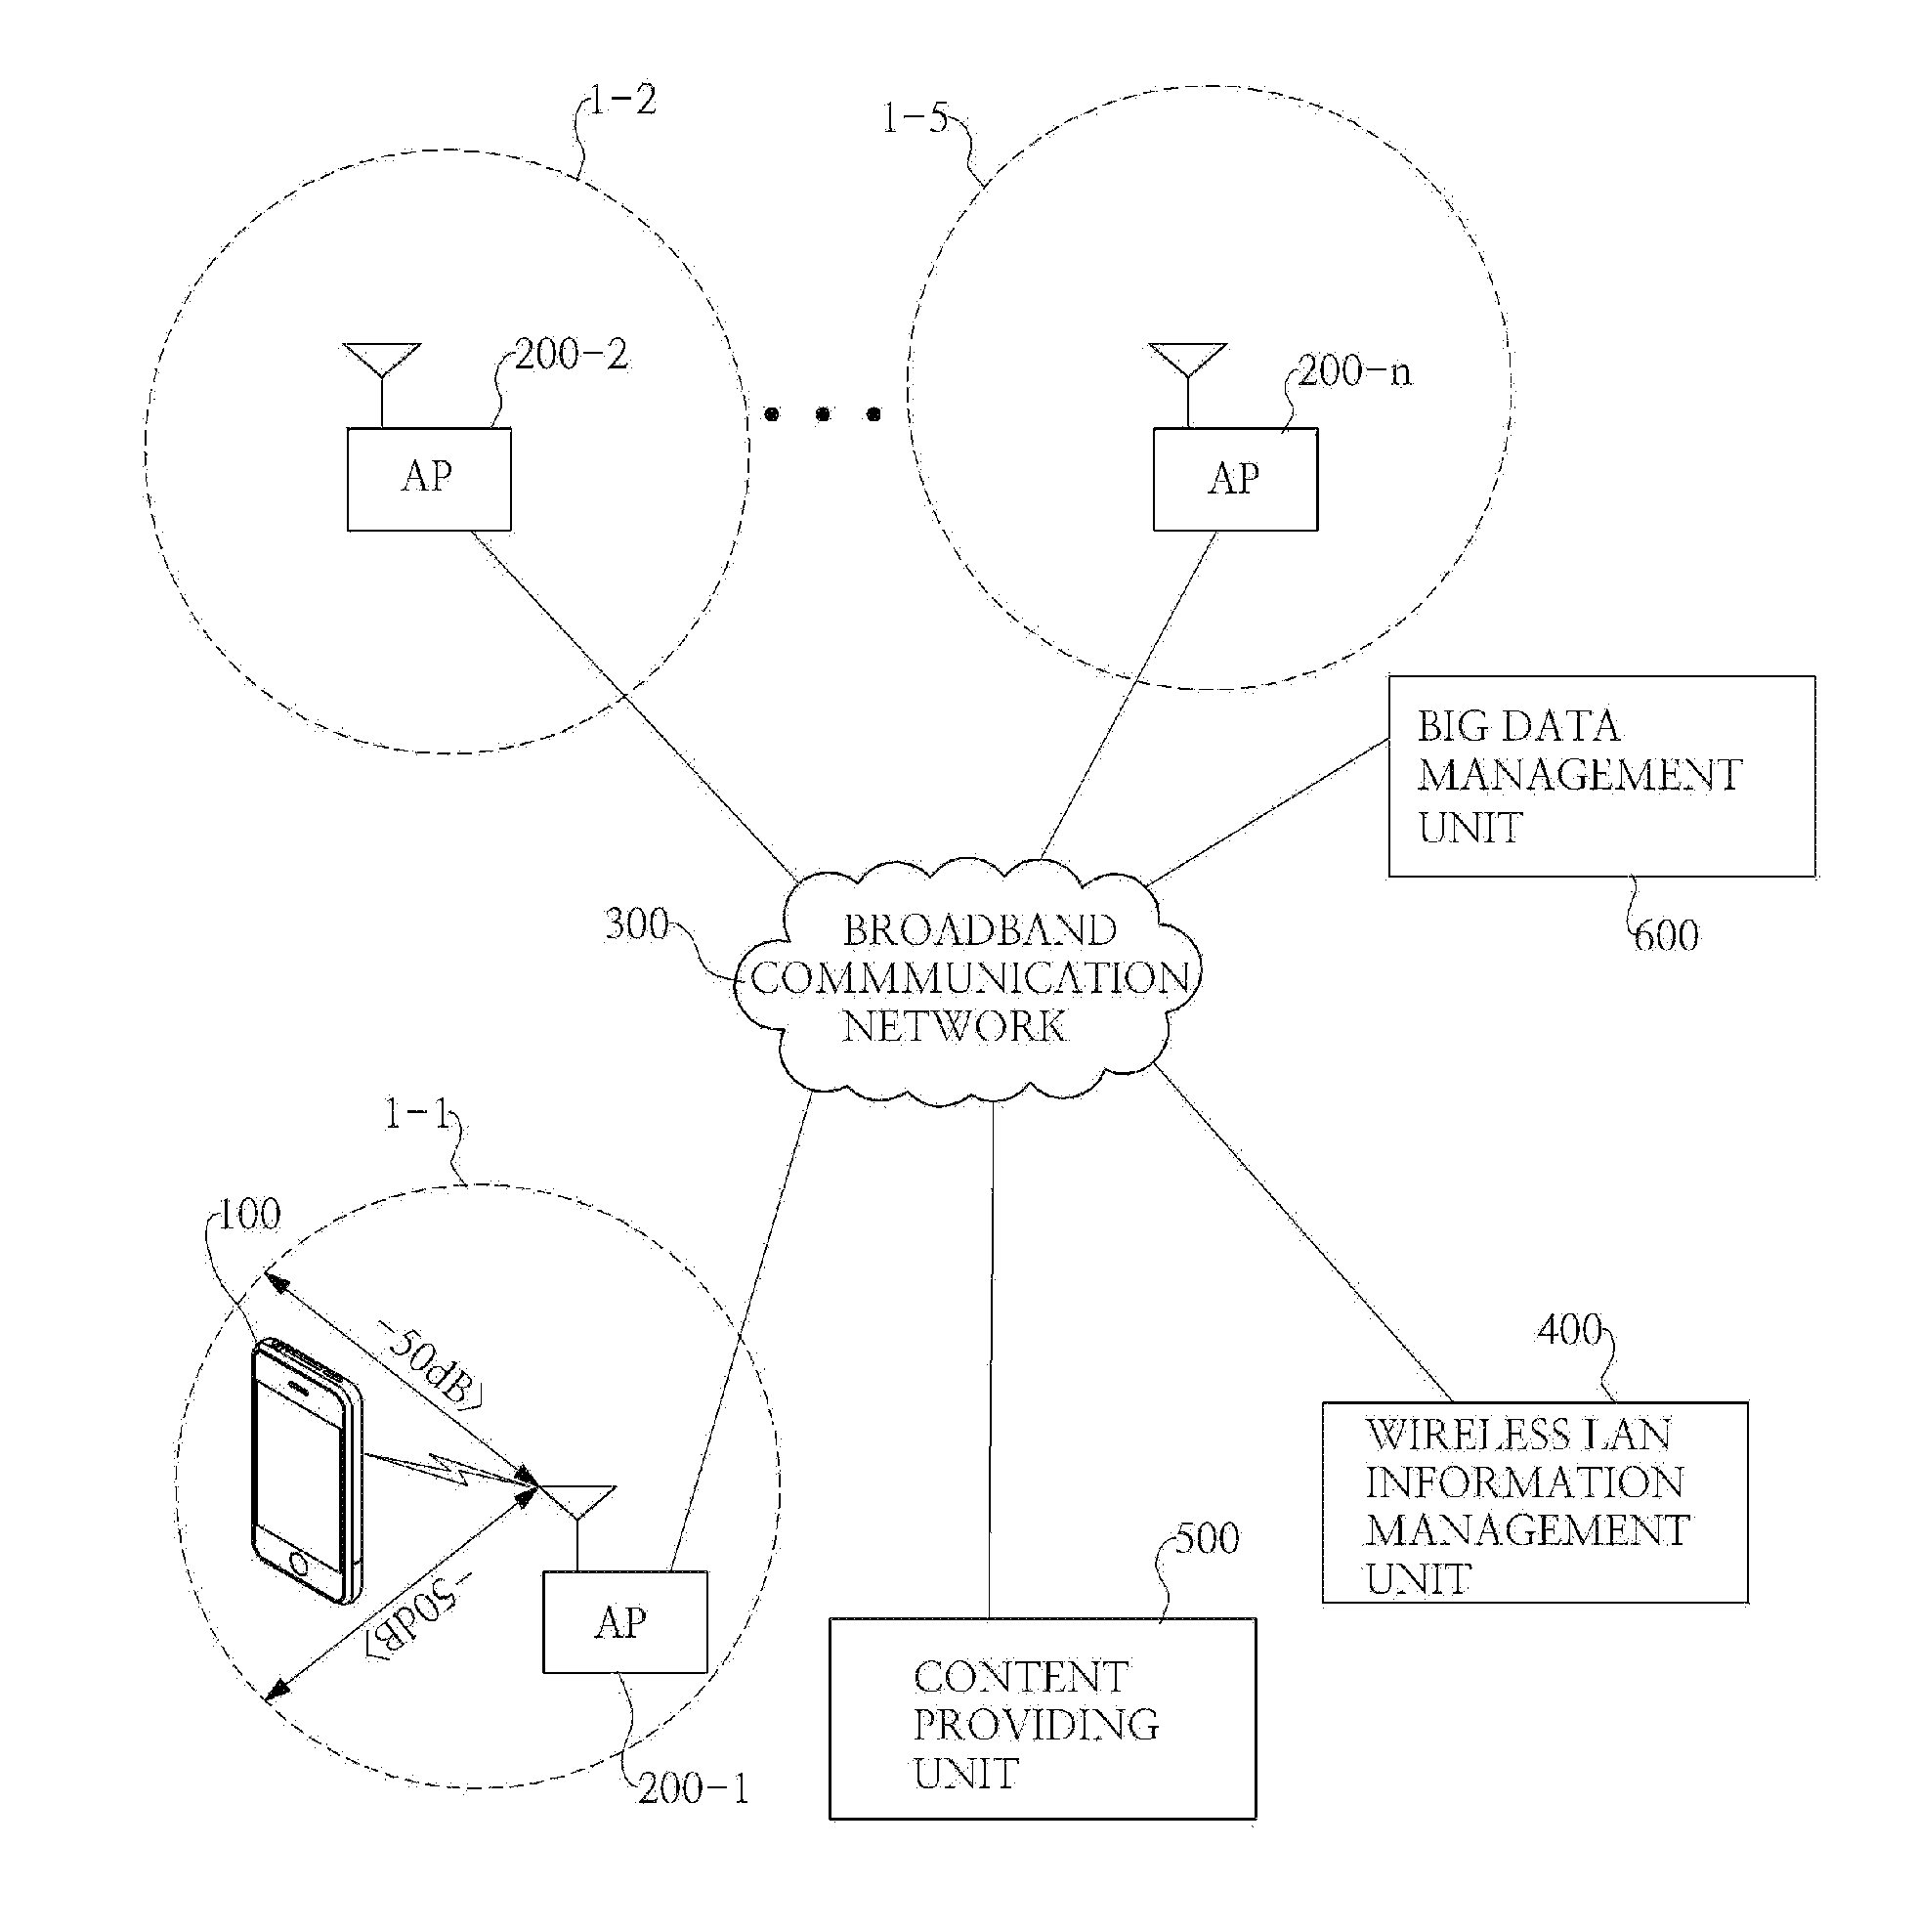 System and method for automatically providing content in access areas based on access points